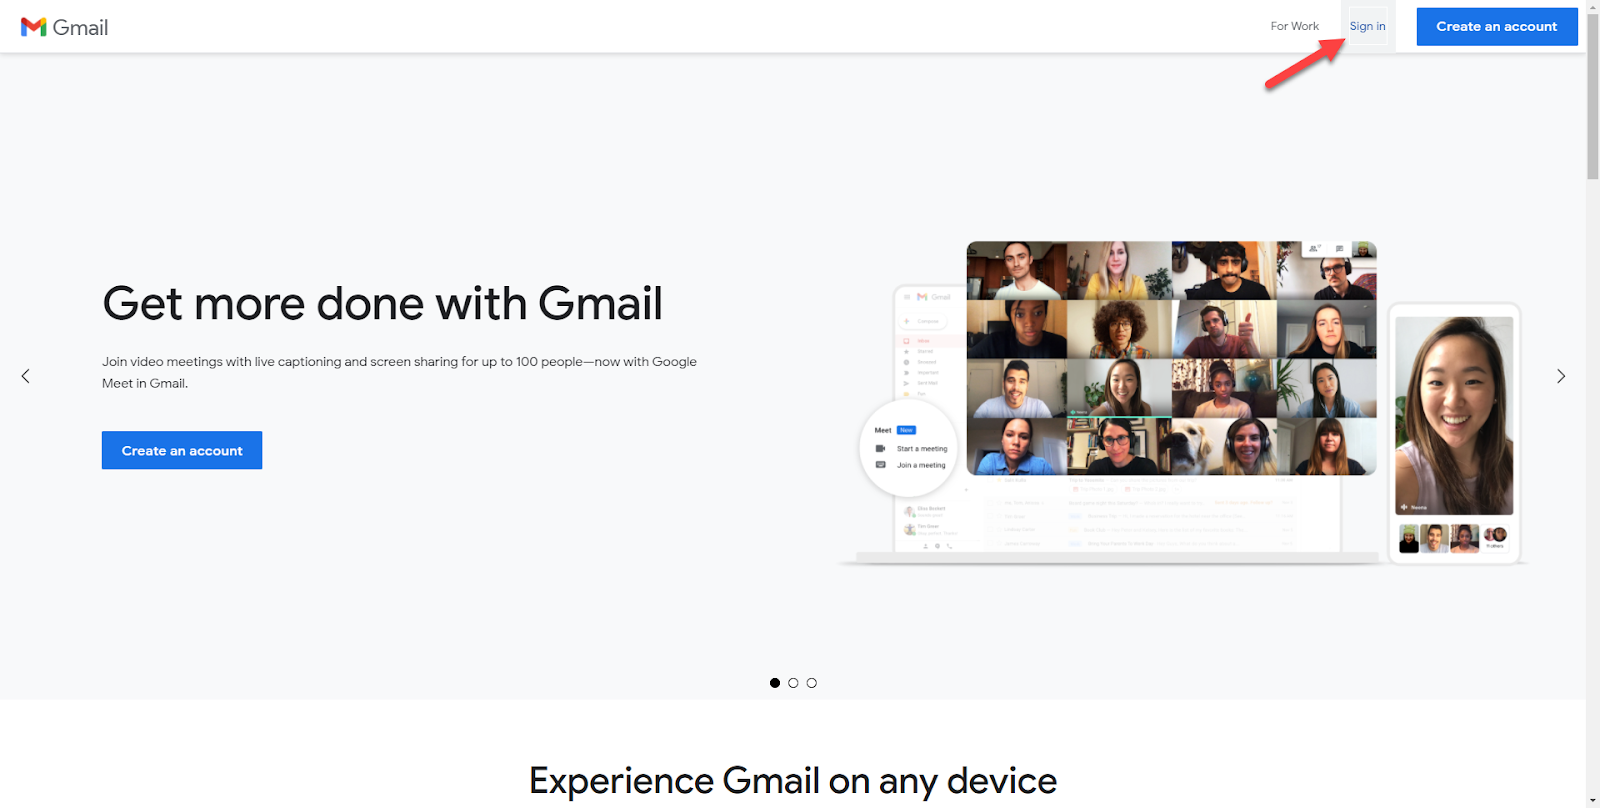 Gmail.com sign in page with an arrow pointing to Sign in in the top right corner